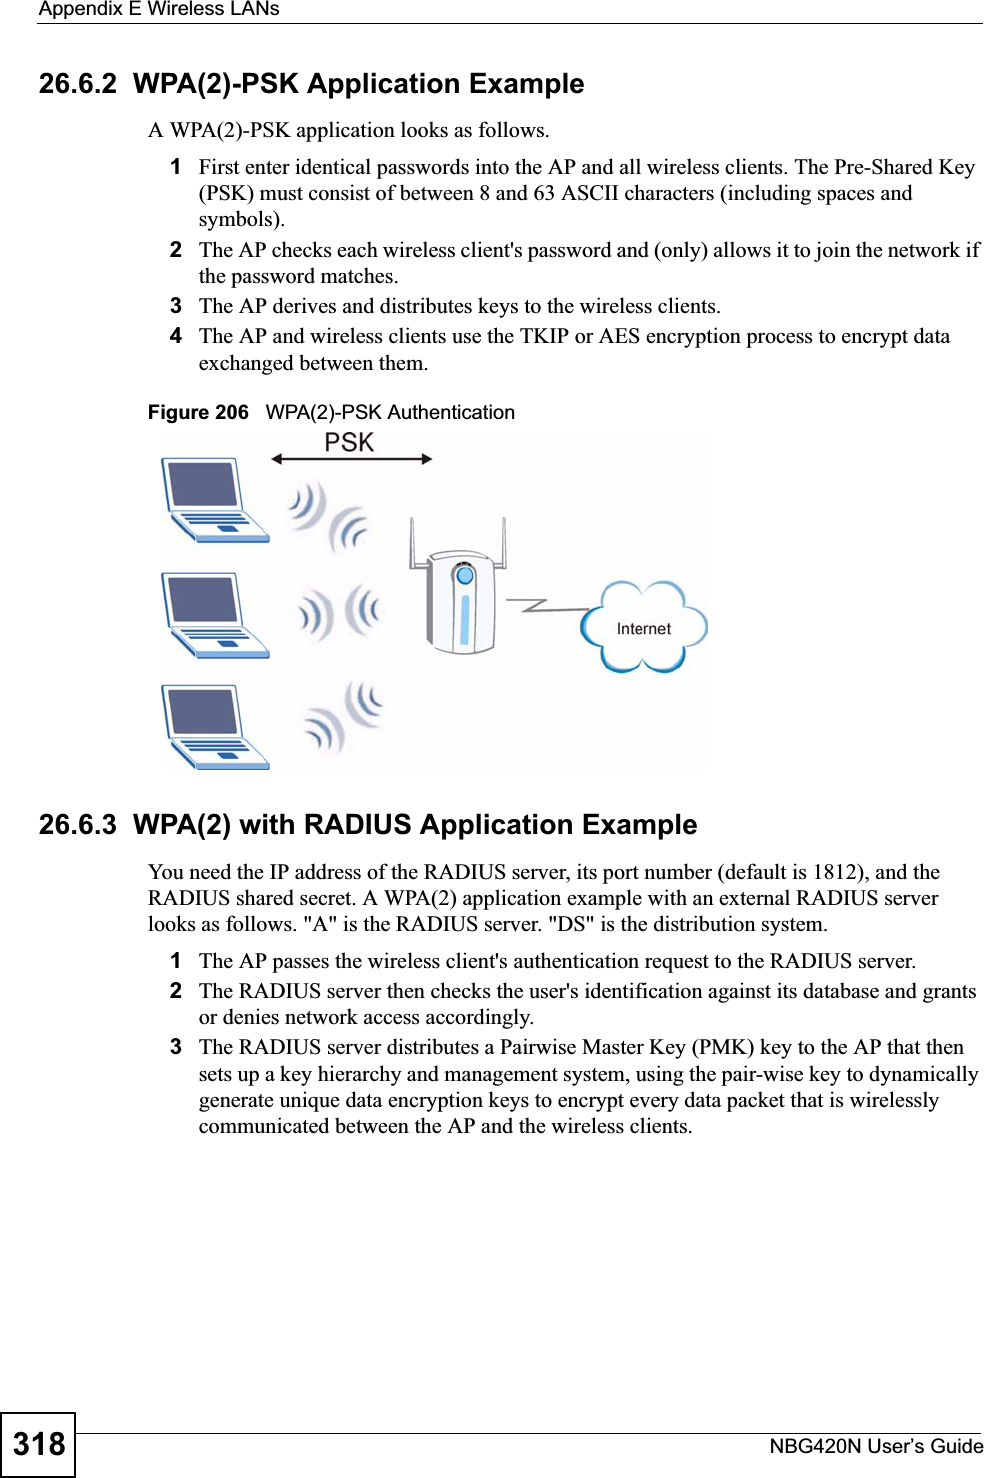 Appendix E Wireless LANsNBG420N User’s Guide31826.6.2  WPA(2)-PSK Application ExampleA WPA(2)-PSK application looks as follows.1First enter identical passwords into the AP and all wireless clients. The Pre-Shared Key (PSK) must consist of between 8 and 63 ASCII characters (including spaces and symbols).2The AP checks each wireless client&apos;s password and (only) allows it to join the network if the password matches.3The AP derives and distributes keys to the wireless clients.4The AP and wireless clients use the TKIP or AES encryption process to encrypt data exchanged between them.Figure 206   WPA(2)-PSK Authentication26.6.3  WPA(2) with RADIUS Application ExampleYou need the IP address of the RADIUS server, its port number (default is 1812), and the RADIUS shared secret. A WPA(2) application example with an external RADIUS server looks as follows. &quot;A&quot; is the RADIUS server. &quot;DS&quot; is the distribution system.1The AP passes the wireless client&apos;s authentication request to the RADIUS server.2The RADIUS server then checks the user&apos;s identification against its database and grants or denies network access accordingly.3The RADIUS server distributes a Pairwise Master Key (PMK) key to the AP that then sets up a key hierarchy and management system, using the pair-wise key to dynamically generate unique data encryption keys to encrypt every data packet that is wirelessly communicated between the AP and the wireless clients. 